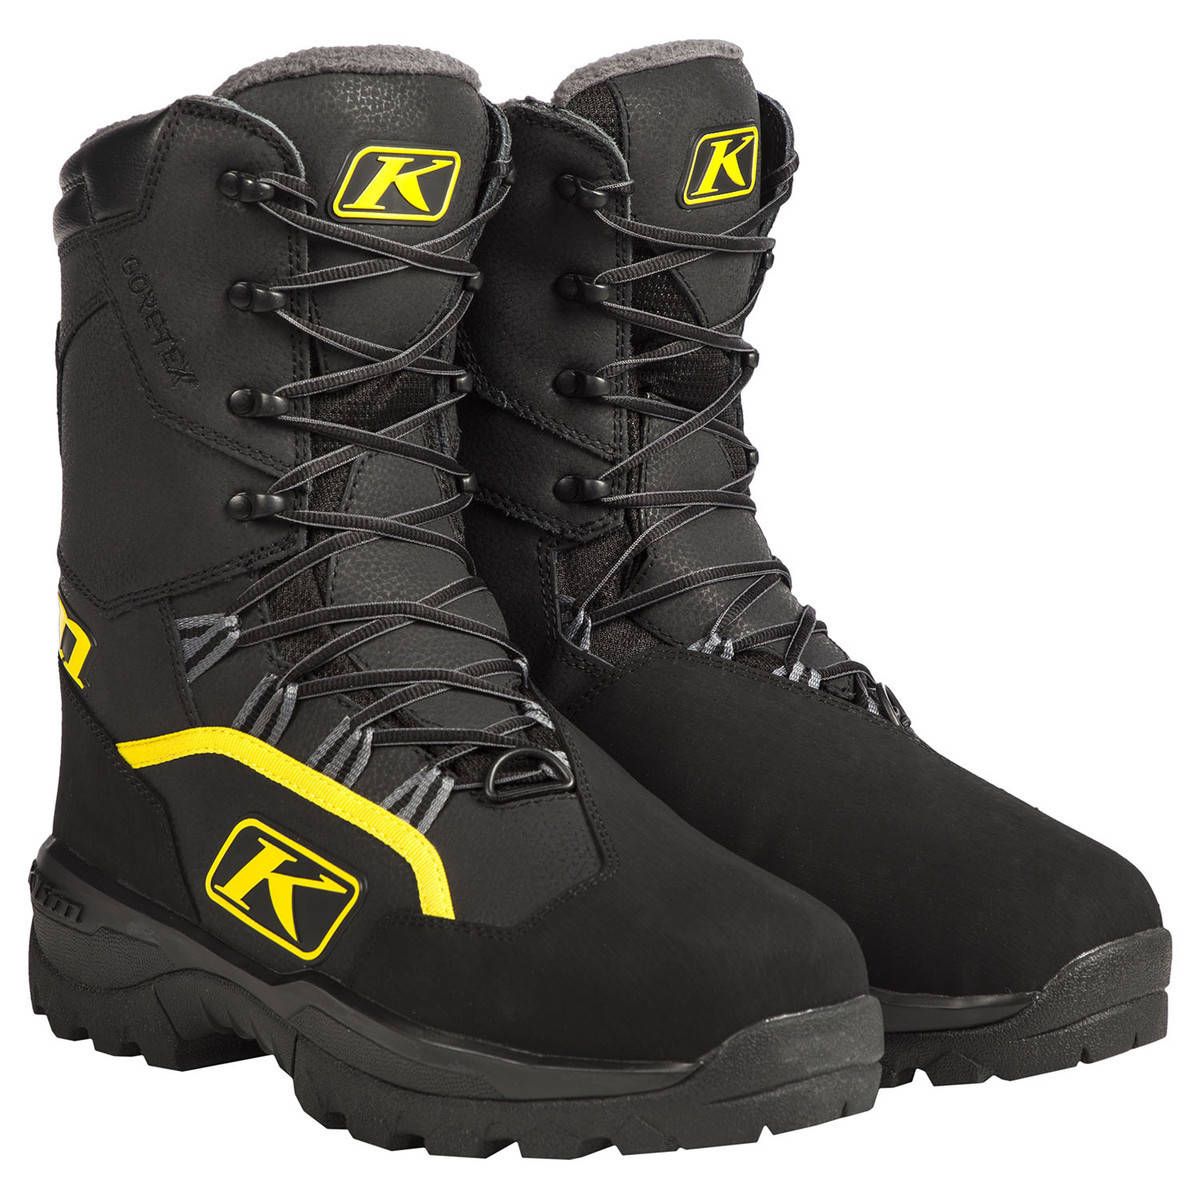 Adrenaline Pro Gtx Boa Boot Hot Sale, UP TO 61% OFF